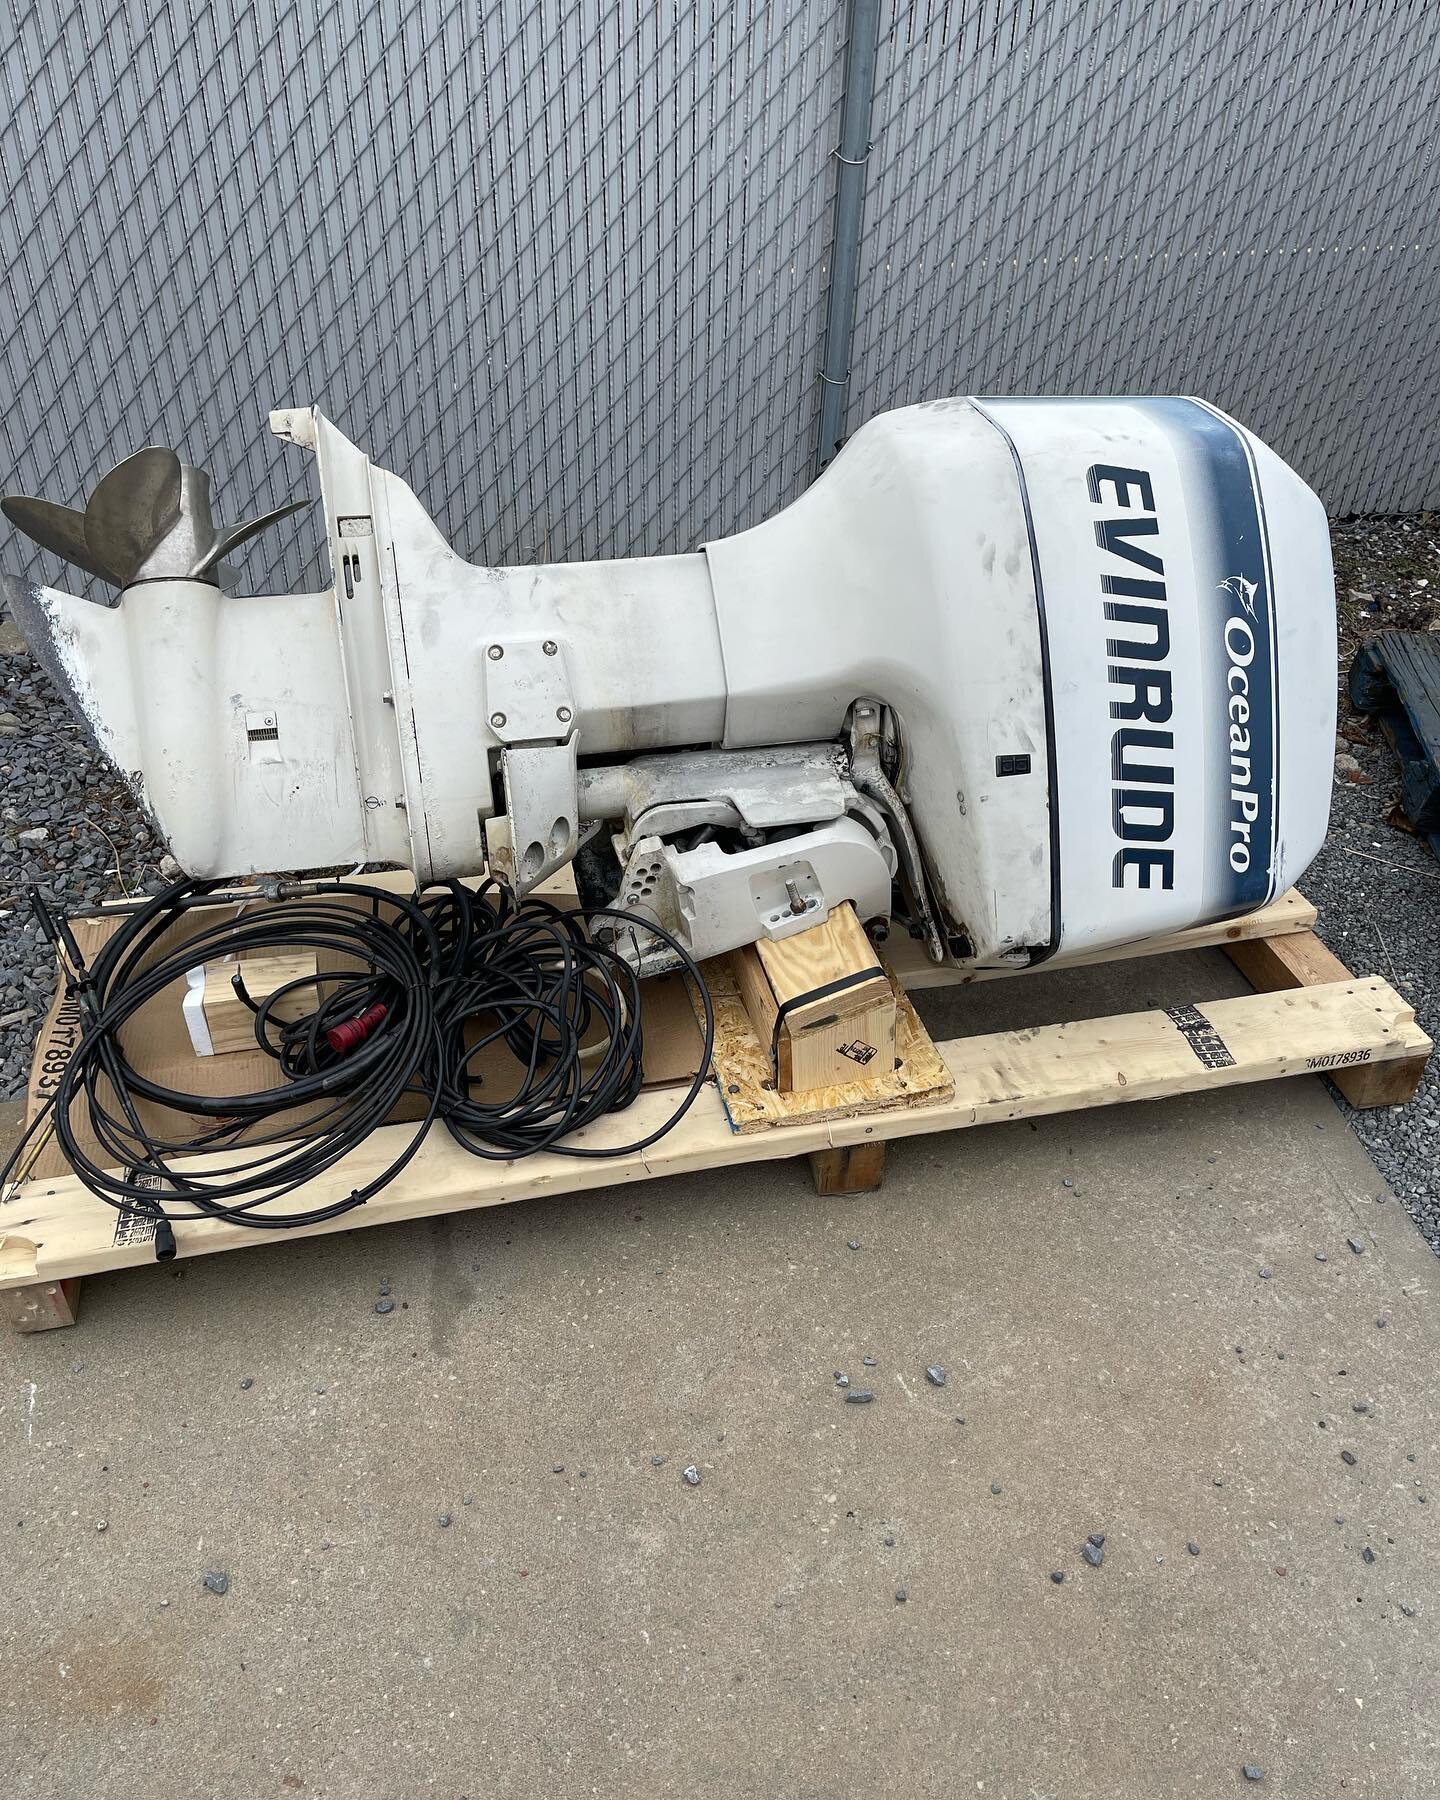 FOR SALE: Evinrude 200 HP ocean pro WITH MOST RIGGING. This is a take off of a repower that we are doing and the motor runs. Unsure of compression and HRS. DM for more info.